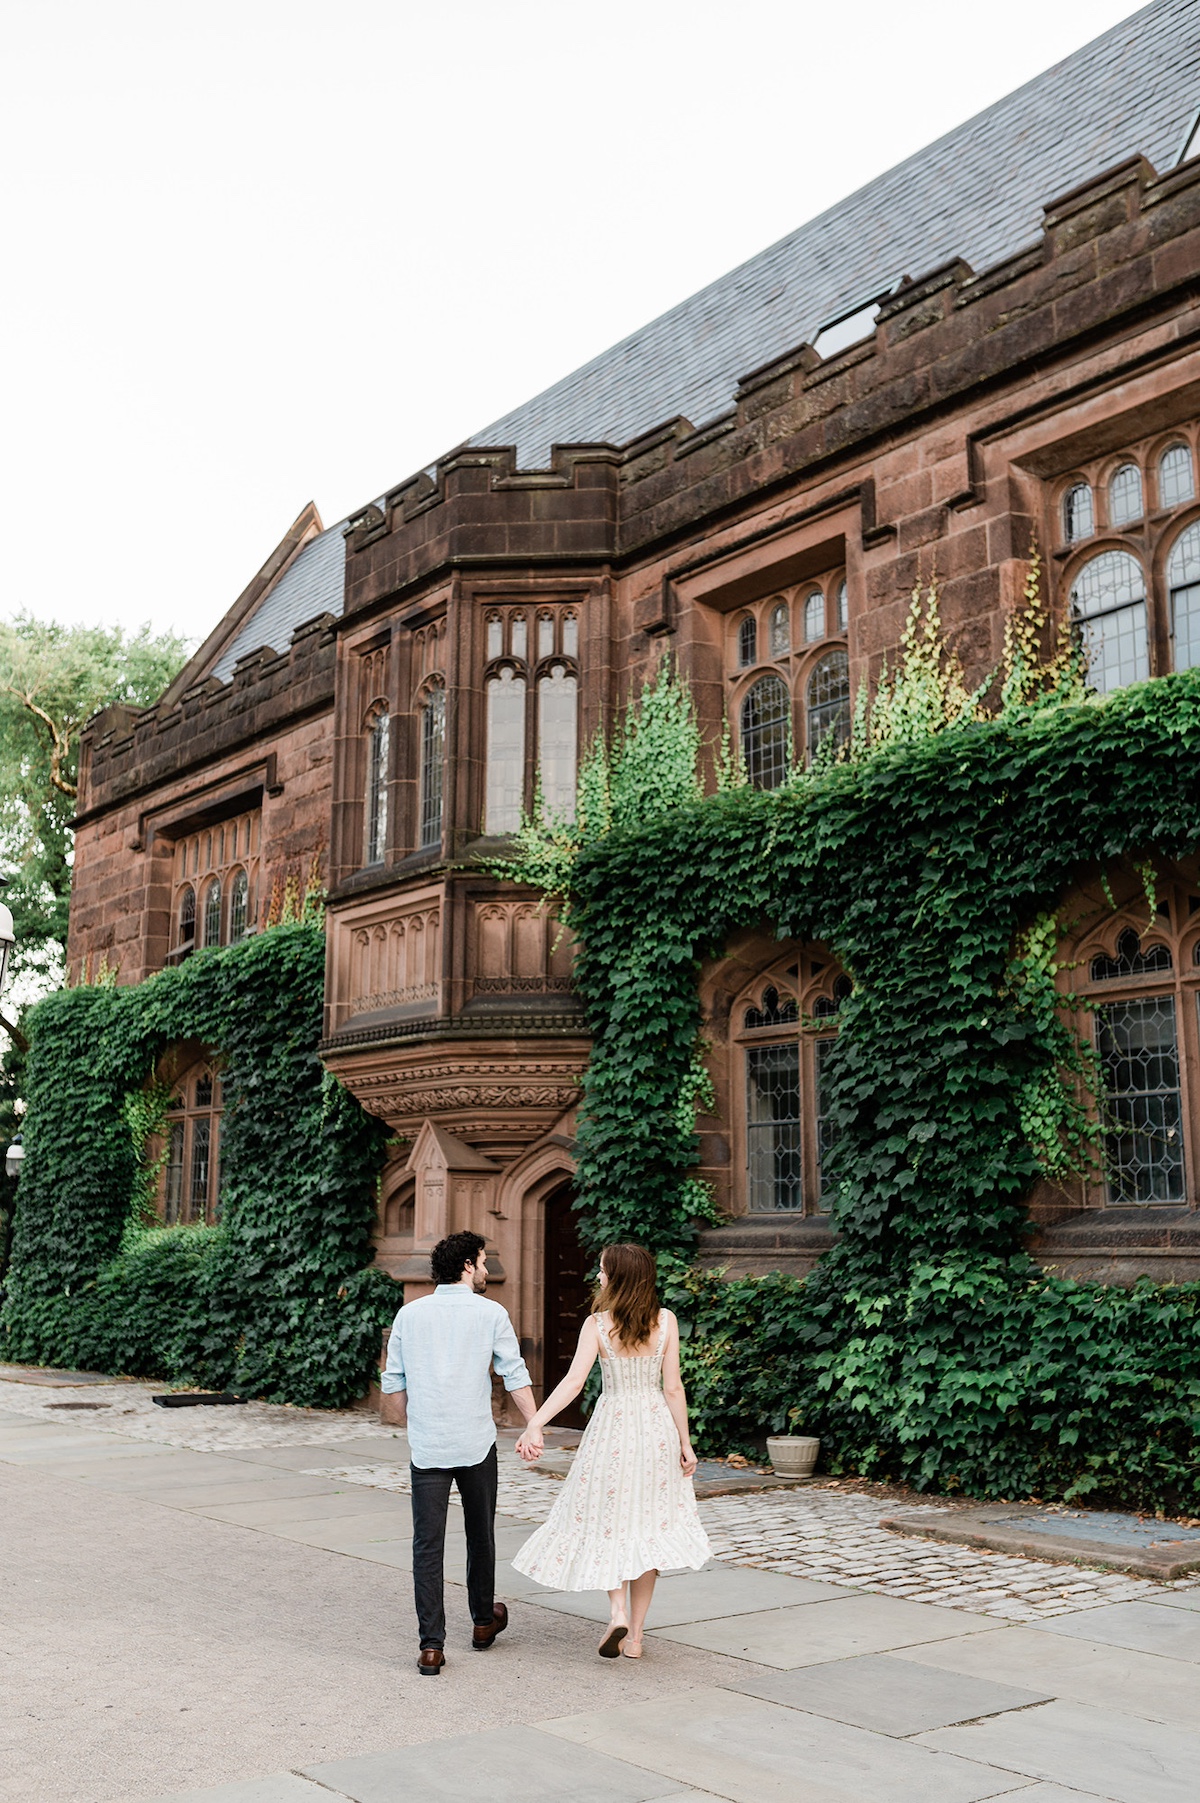 Amidst Princeton's timeless architecture, Page and Christopher share a loving moment, creating memories to last a lifetime.